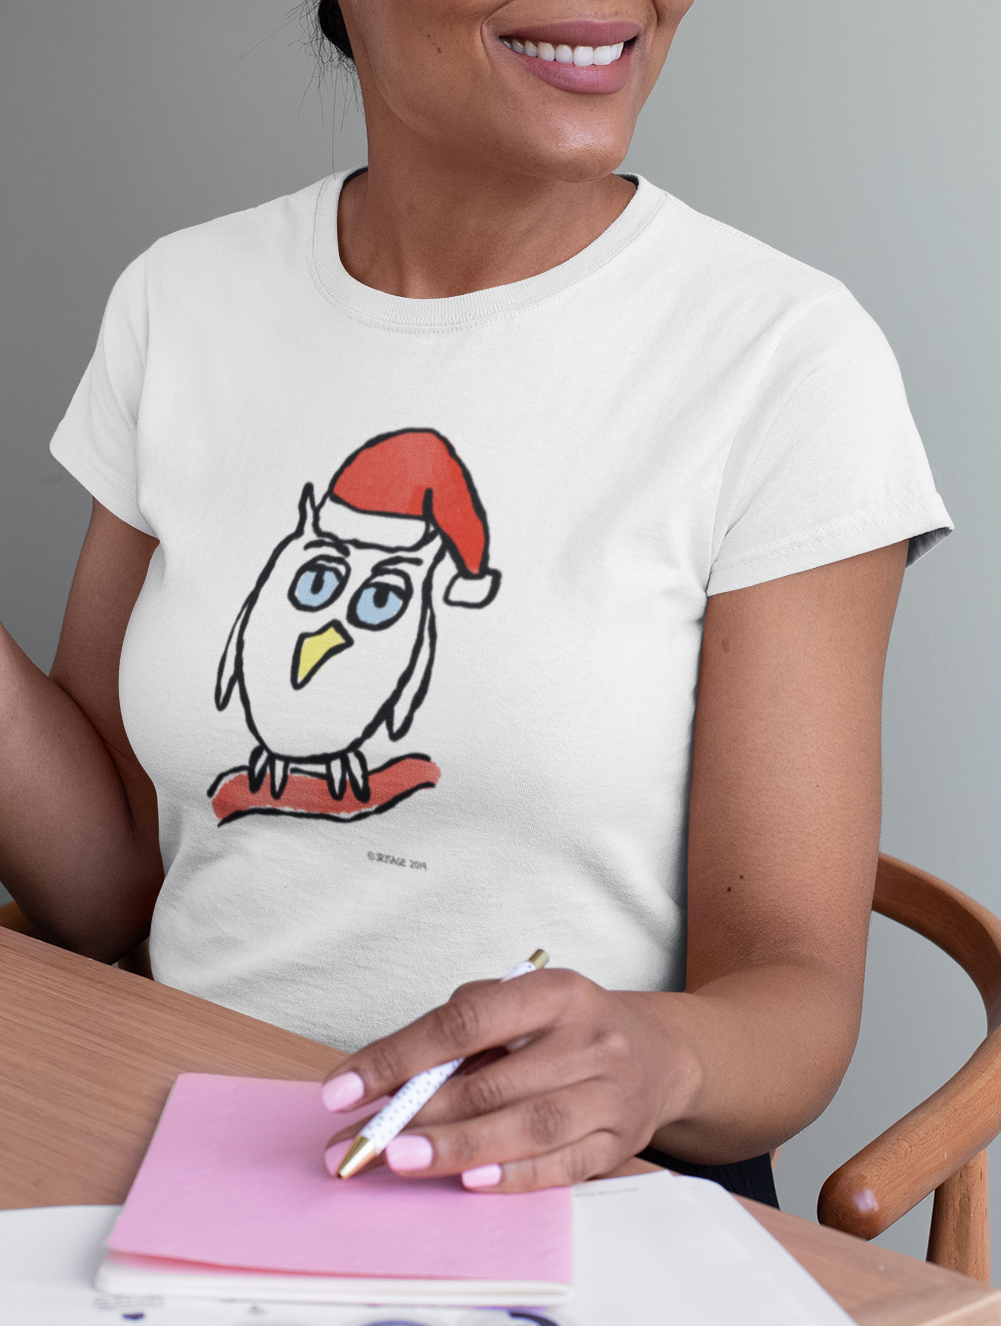 Woman wearing a Santa Night Owl cute Christmas T-shirt illustrated design by Hector and Bone on a vegan cotton t-shirt